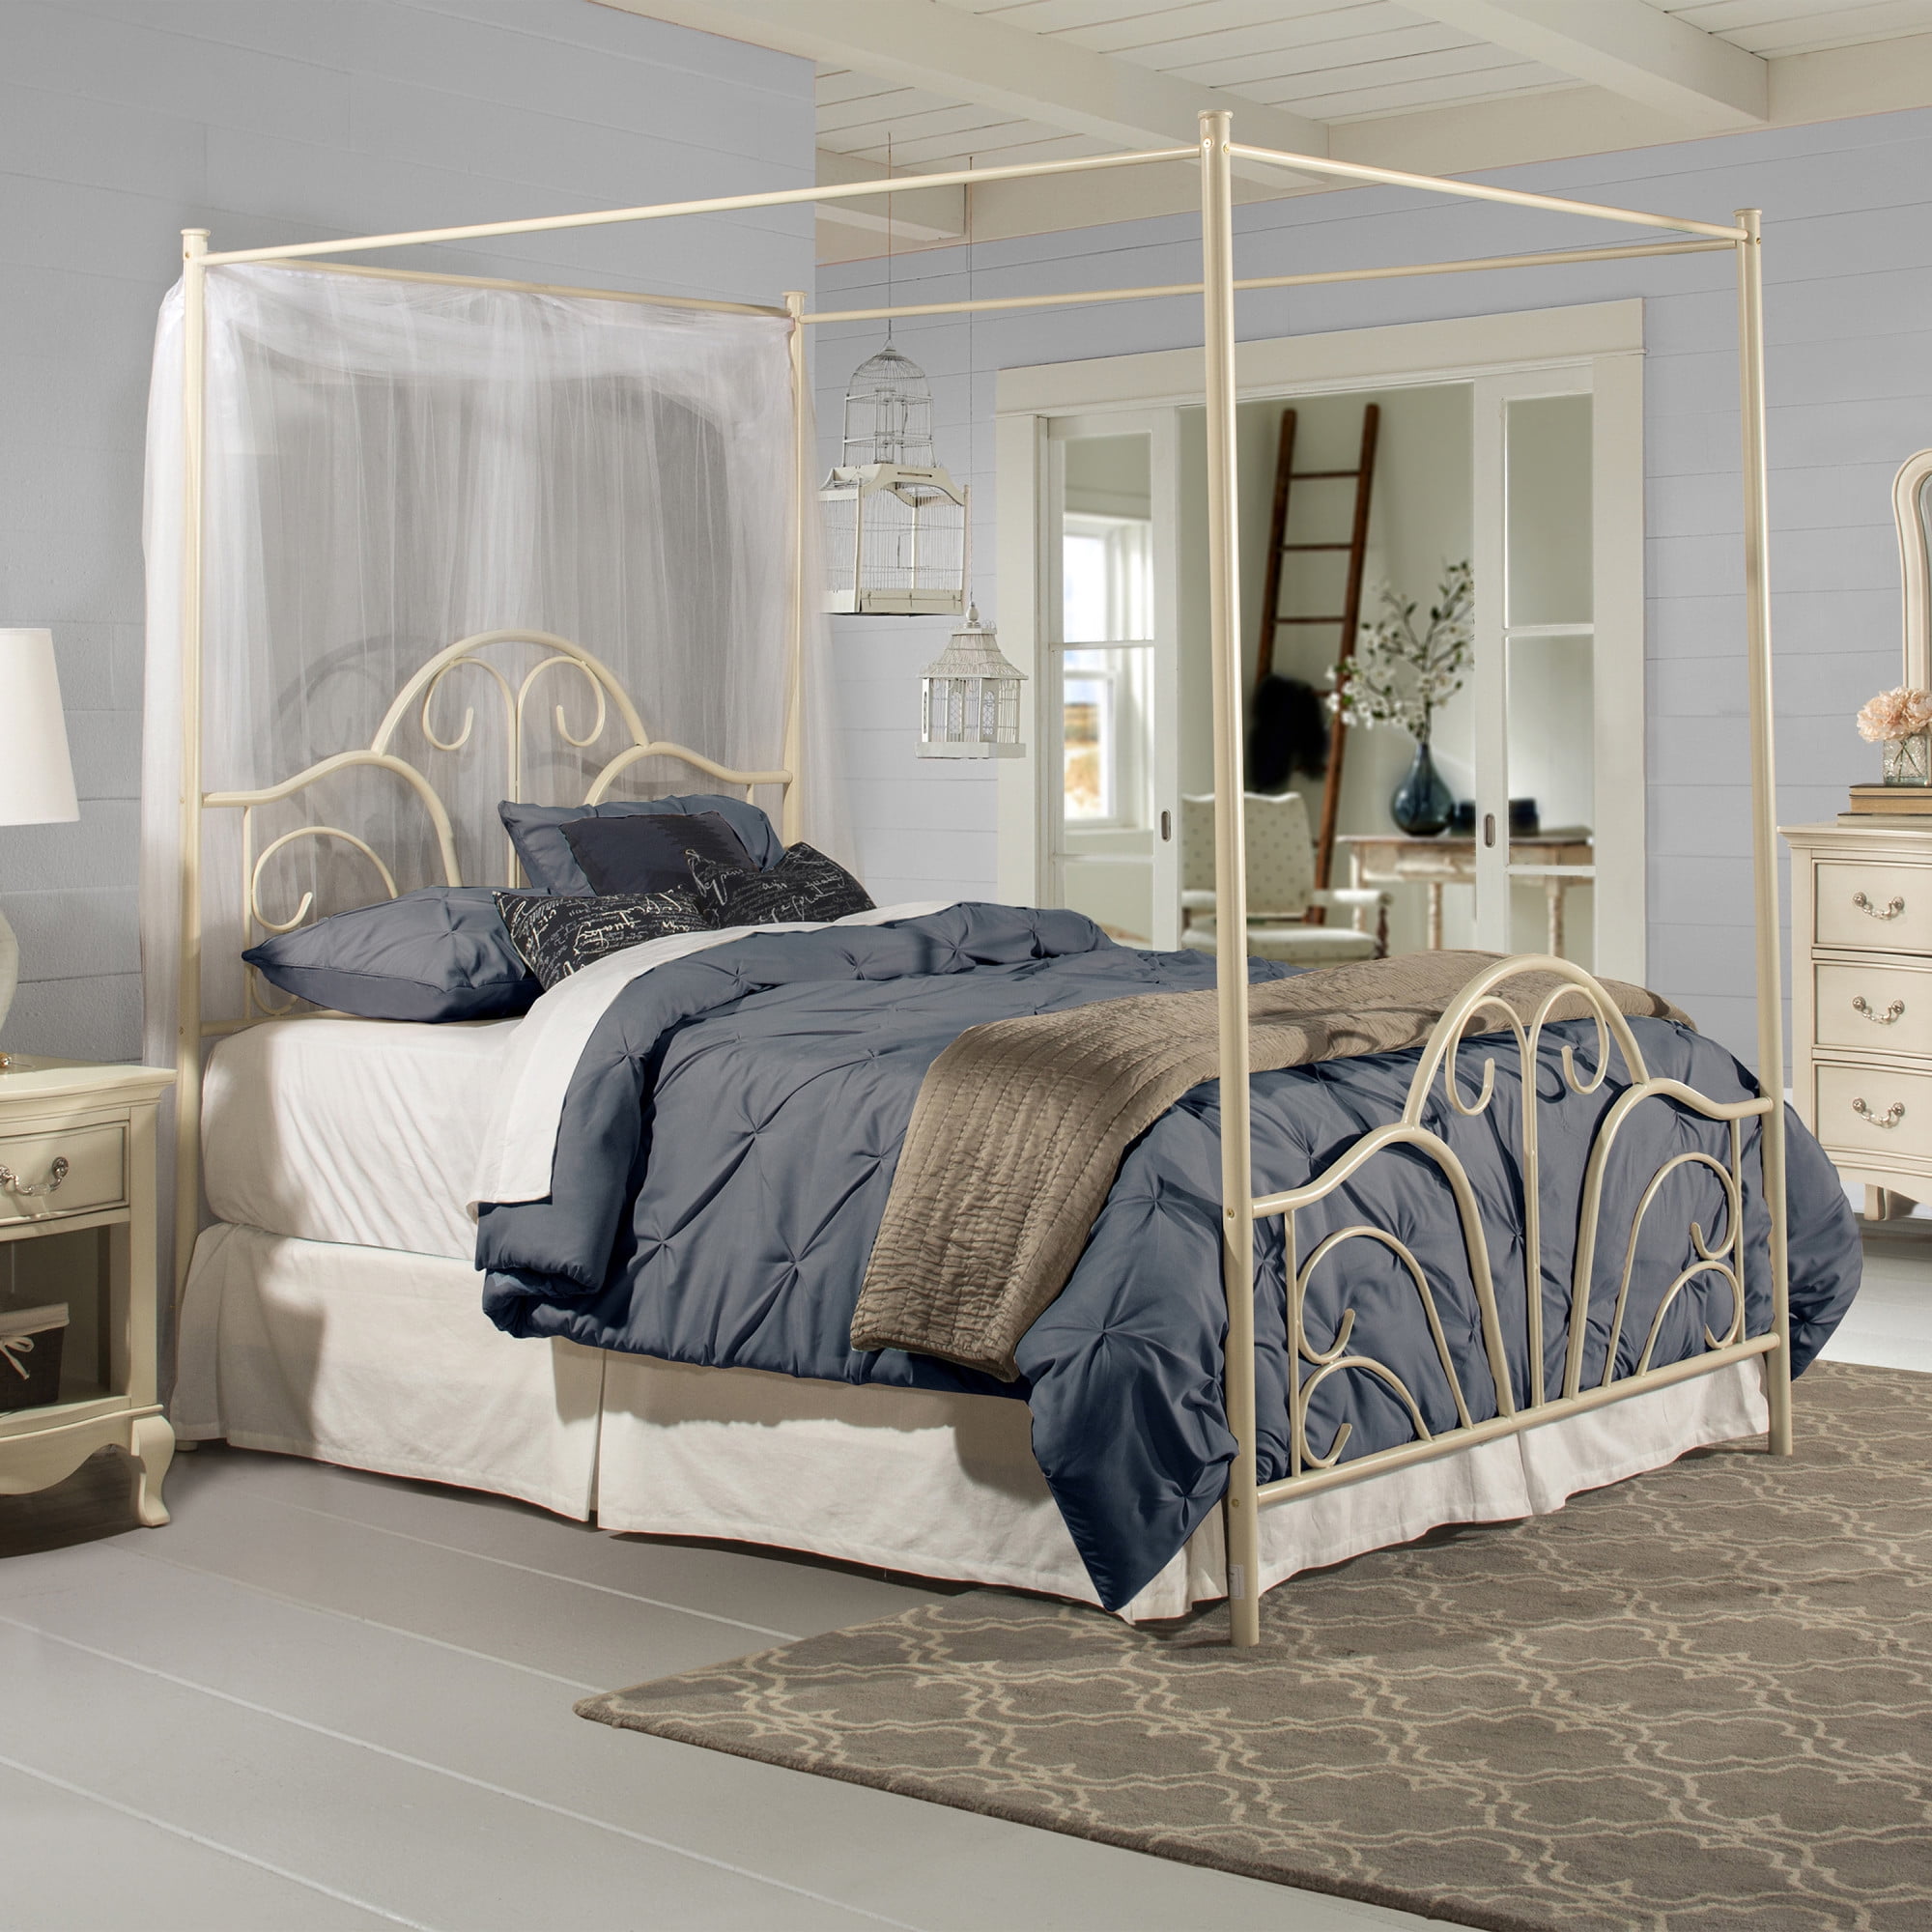 Dover Canopy Metal Queen Bed, Cream Bed Frame